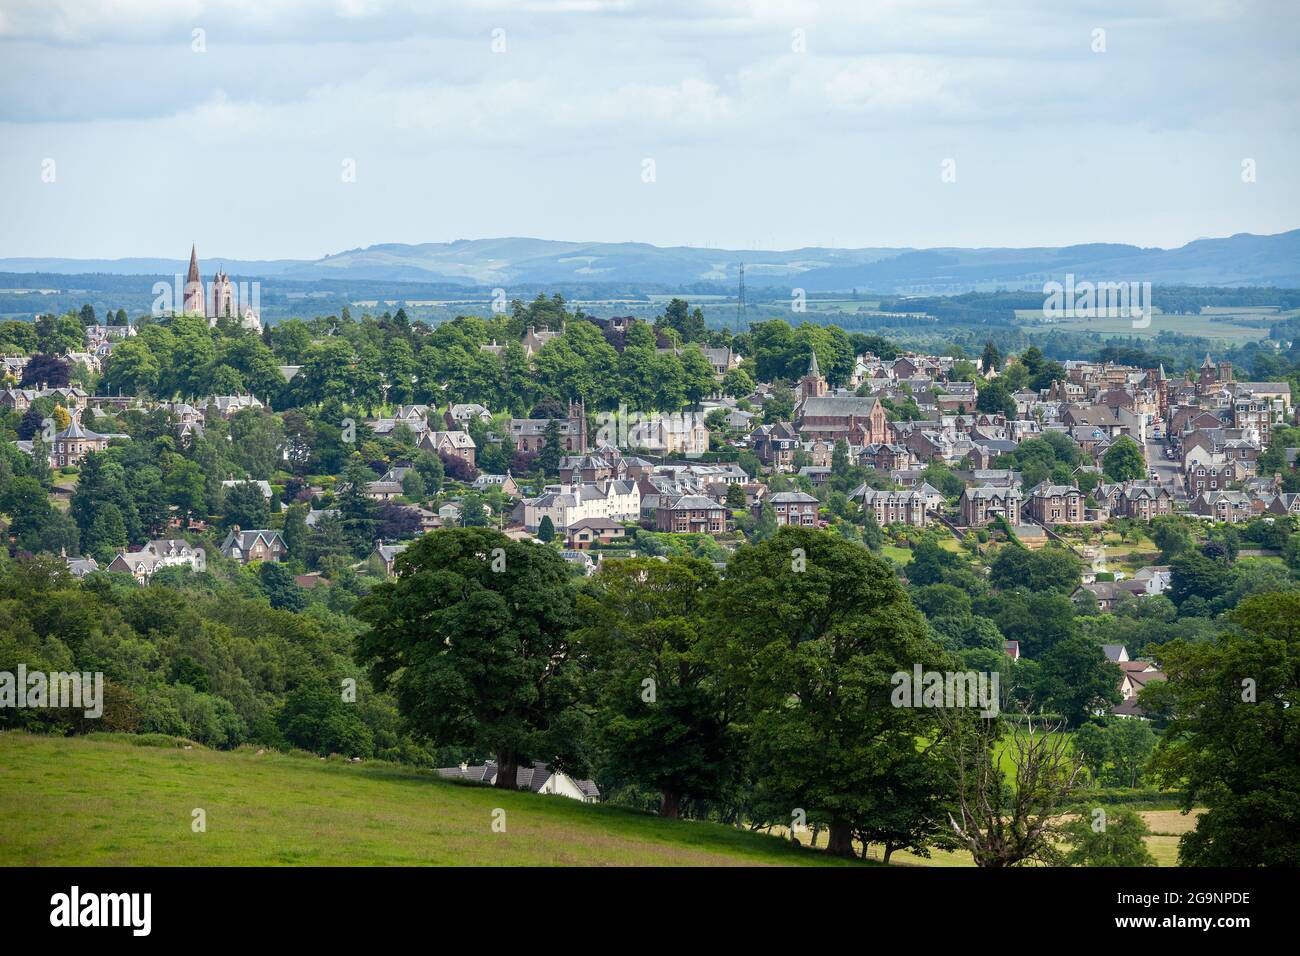 The town of Crieff, Perthshire, Scotland Stock Photo